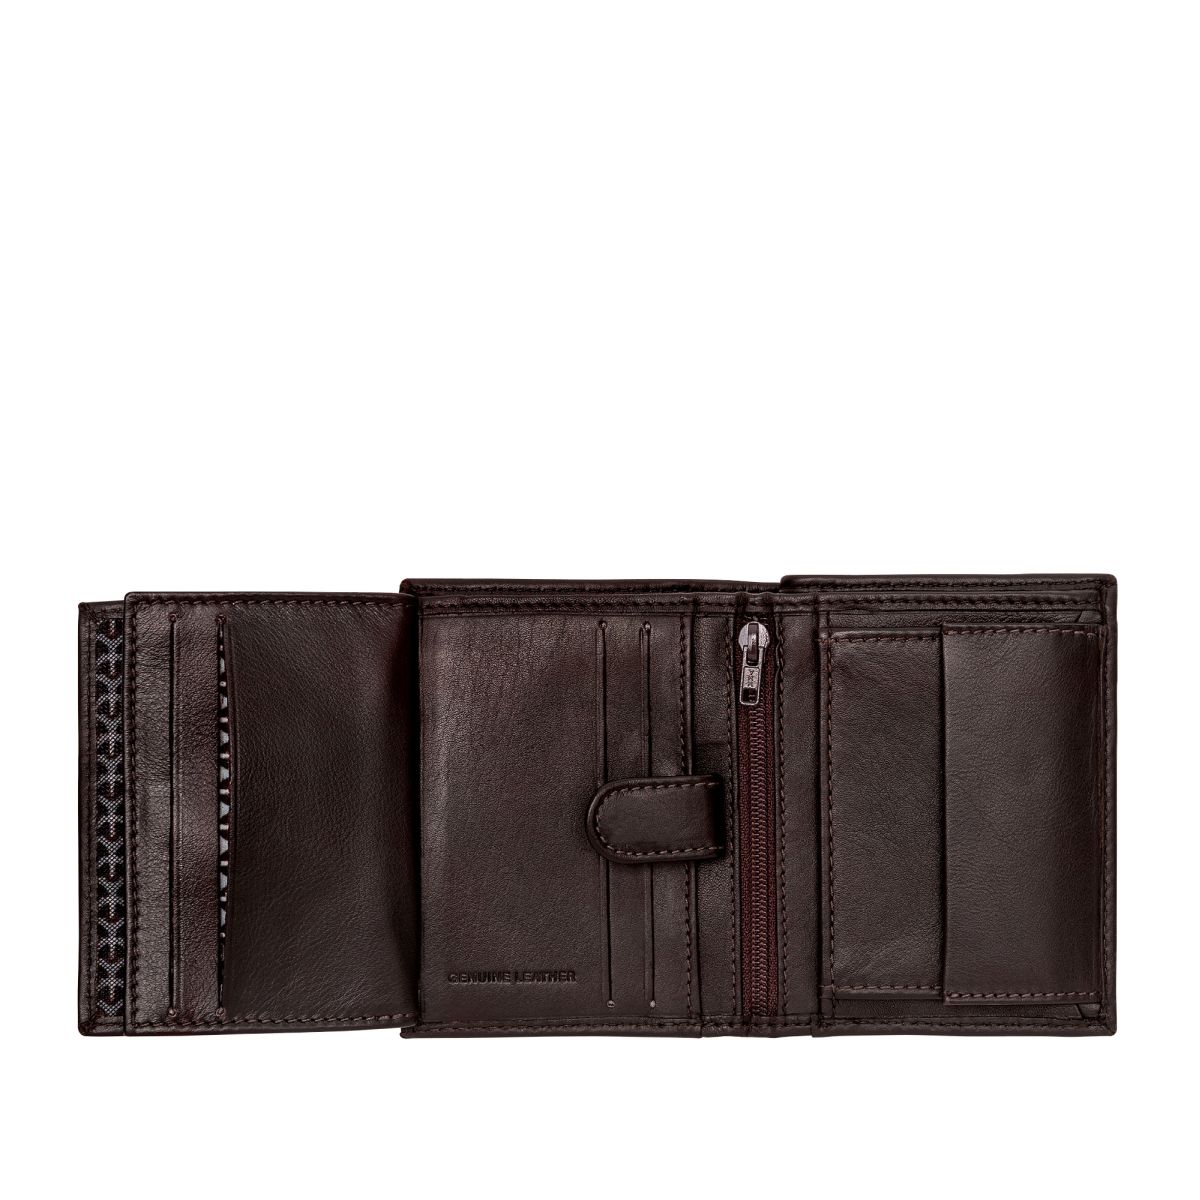 NUVOLA PELLE Small mens wallet with coin pocket - Dark Brown